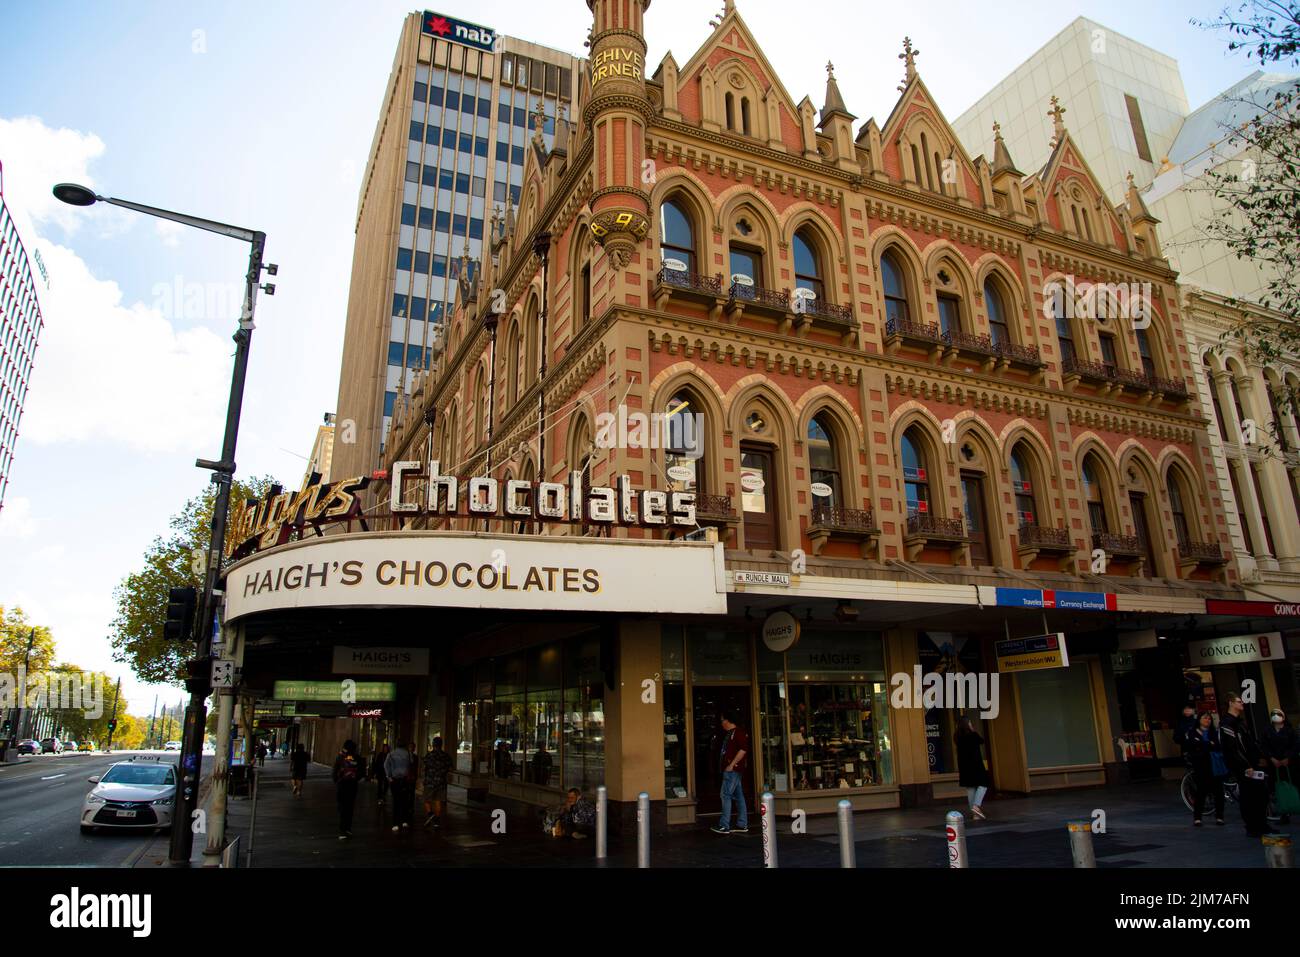 Adelaide, Australia - May 1, 2022: Haigh's Chocolates founded in 1915 Stock Photo